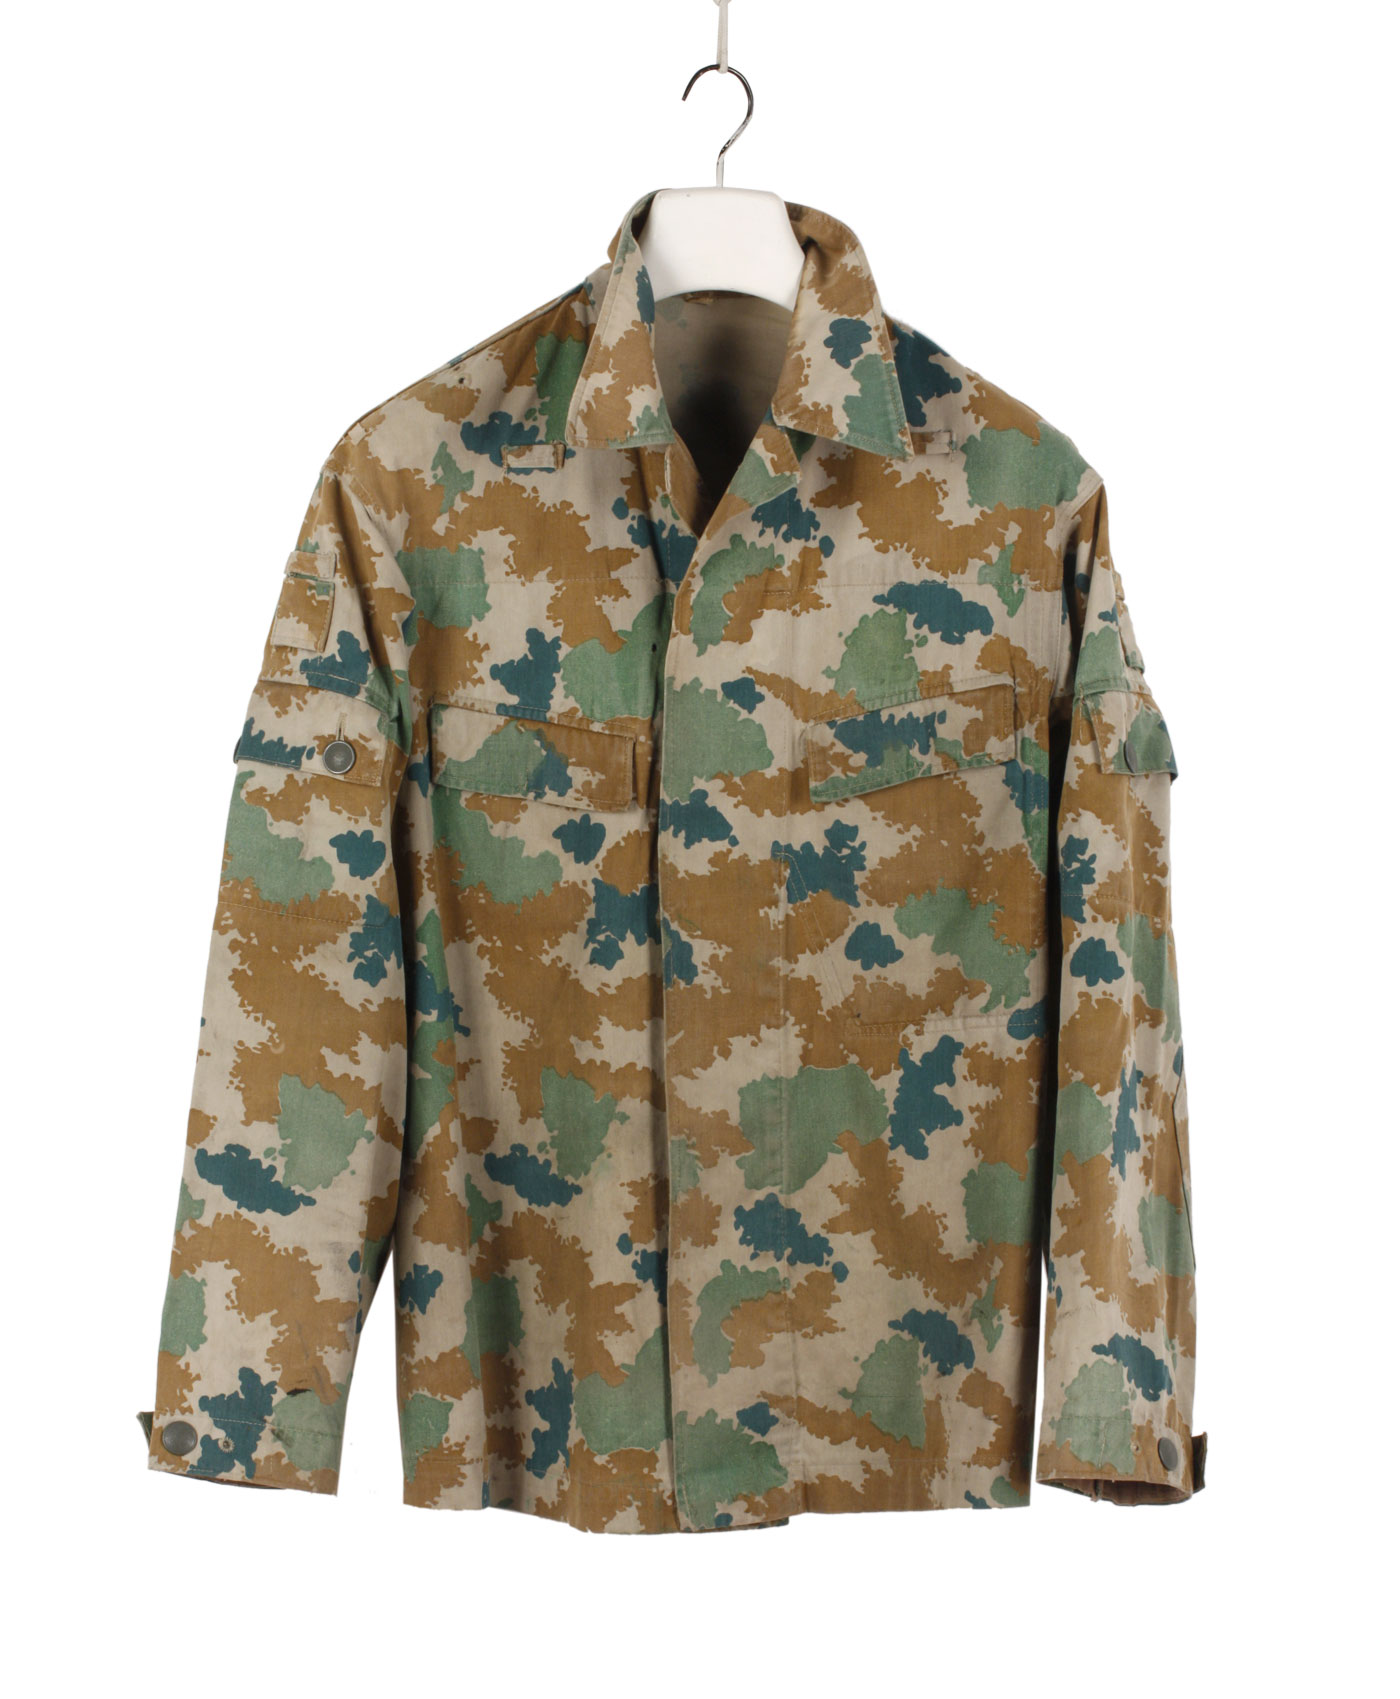 German Military Camouflage jacket ’70/80s